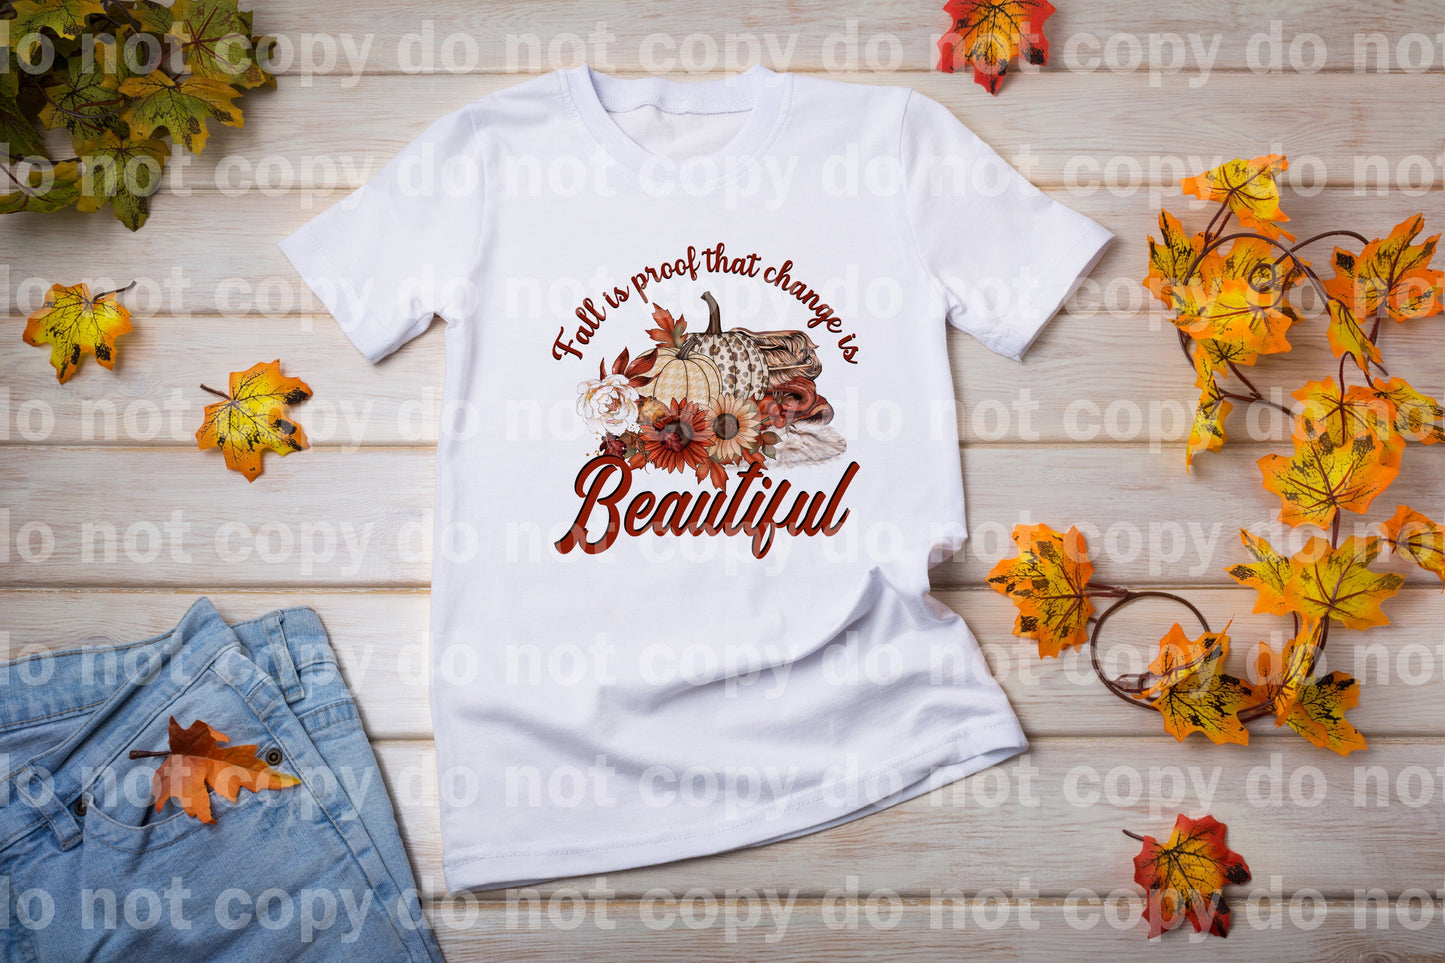 Fall Is Proof That Change Is Beautiful Dream Print or Sublimation Print